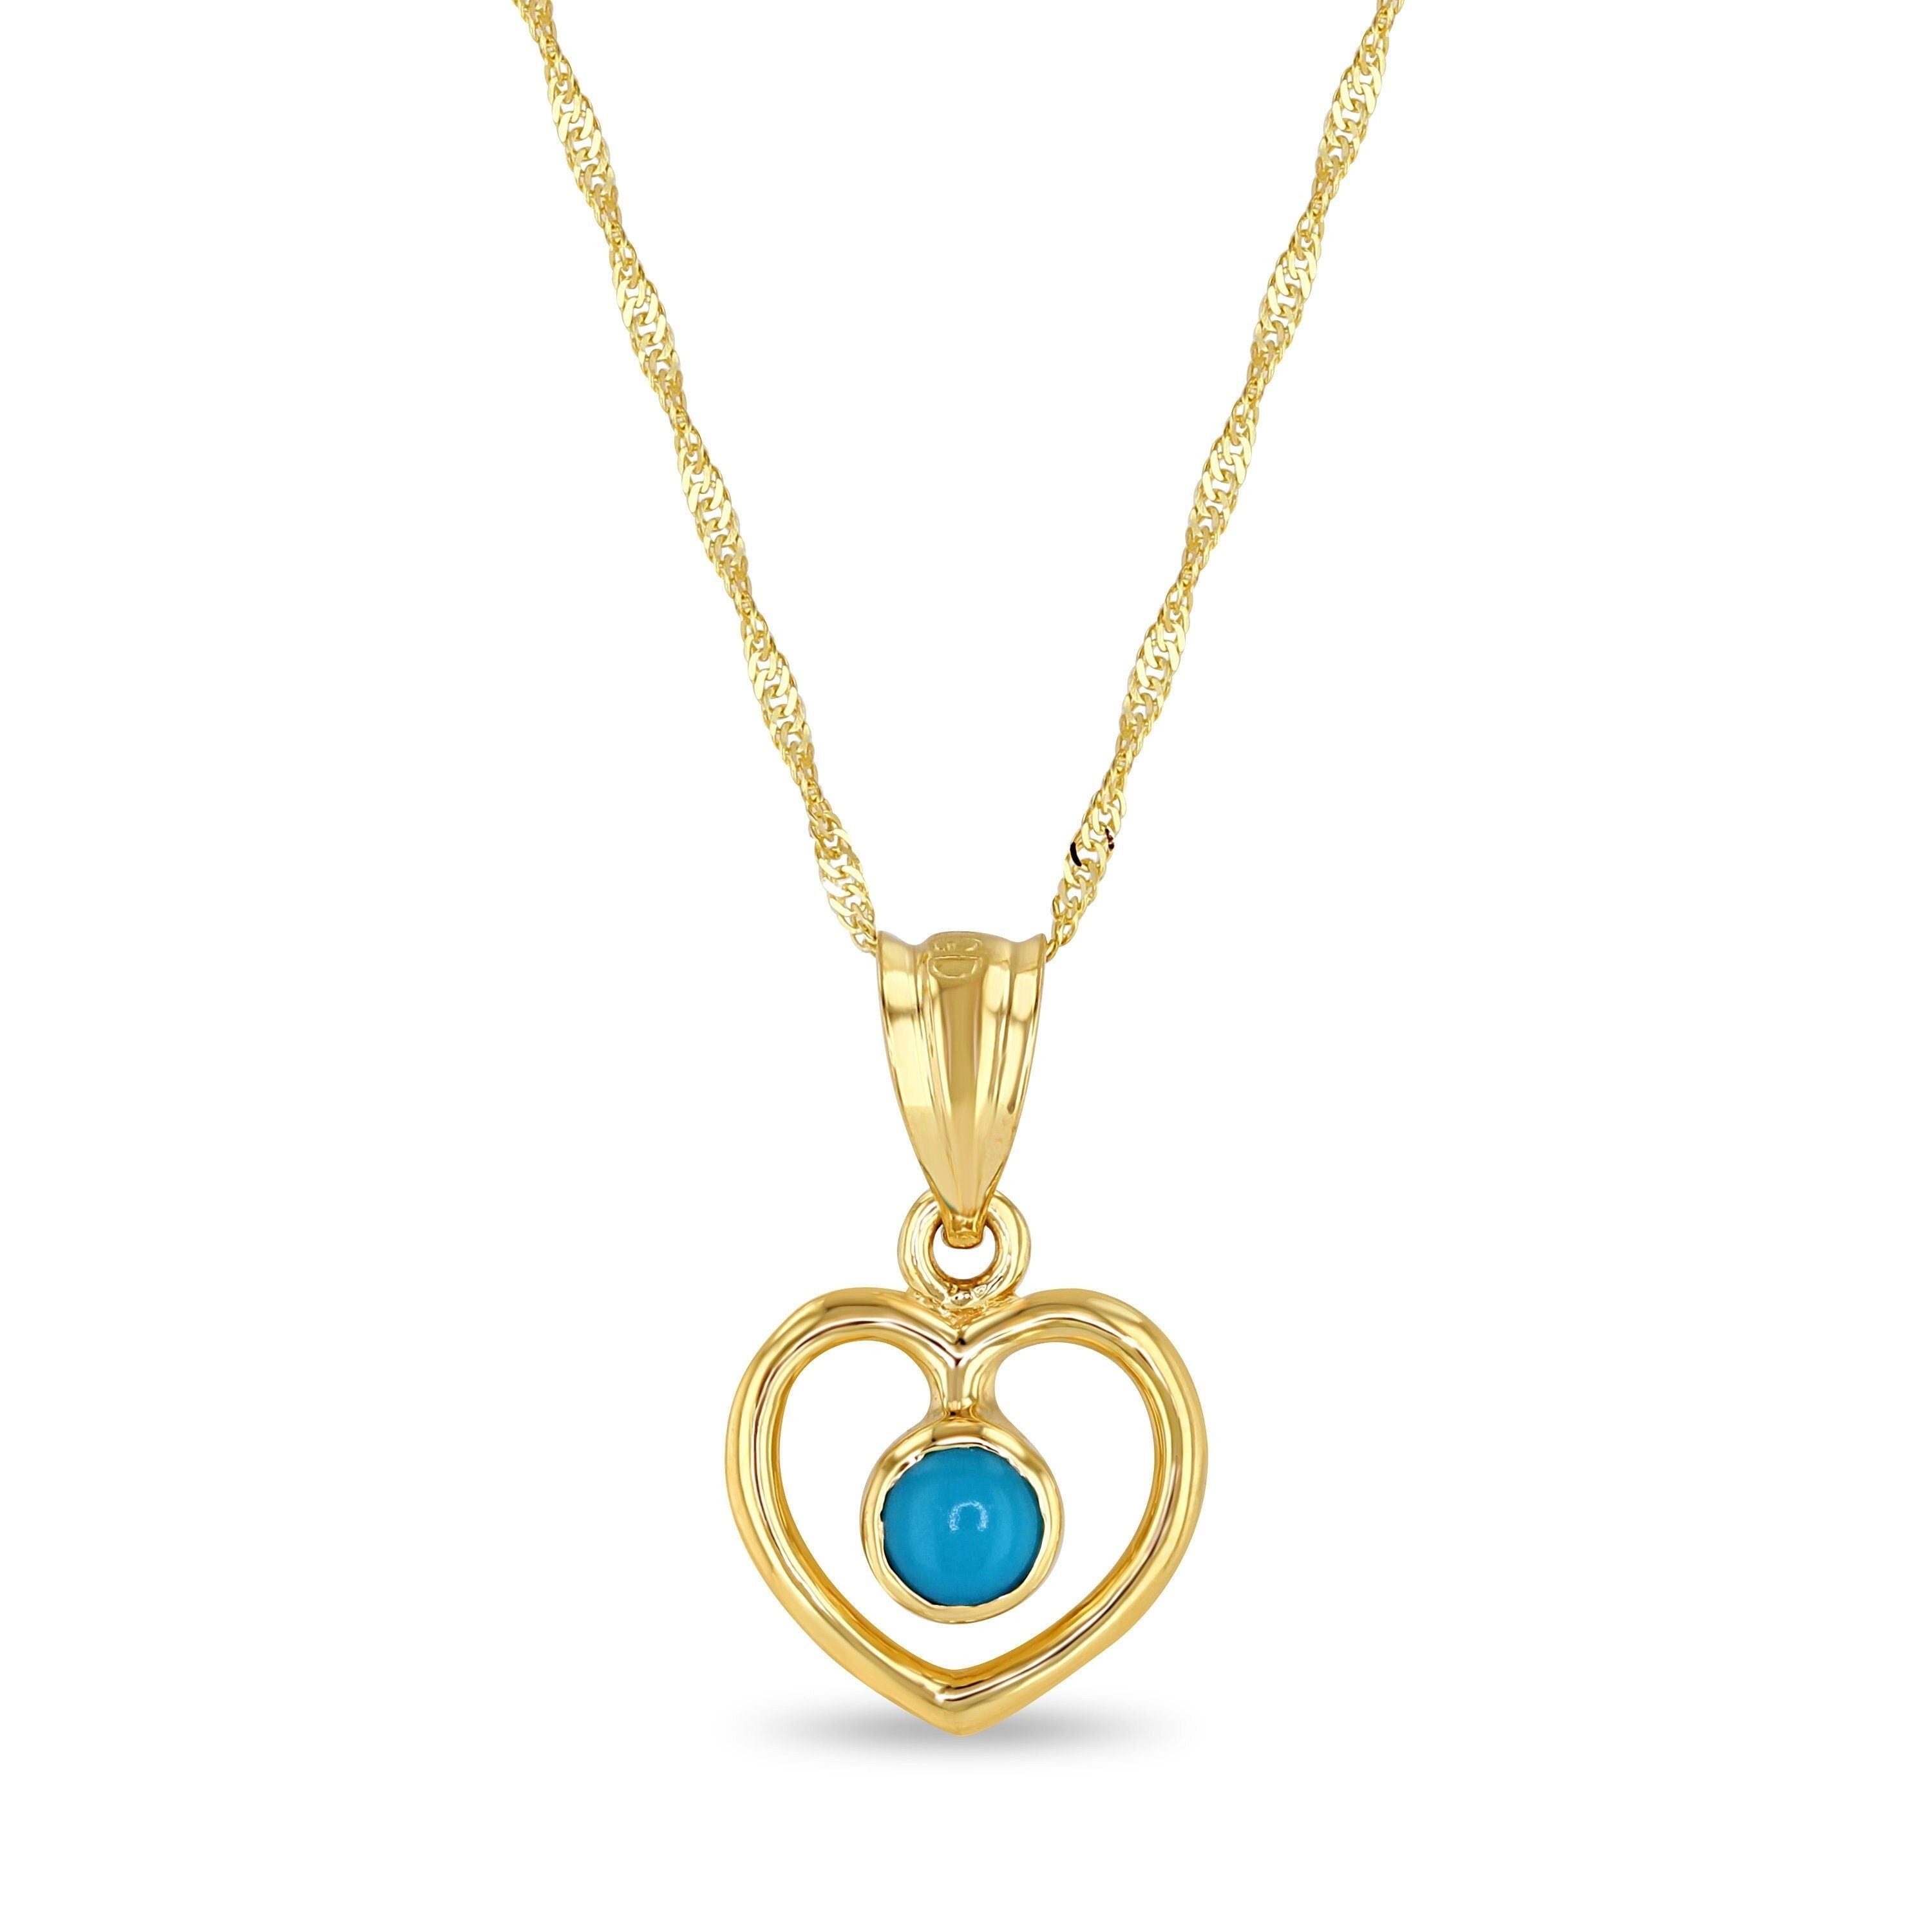 14k solid gold heart pendant on 18" chain with genuine turquoise stone